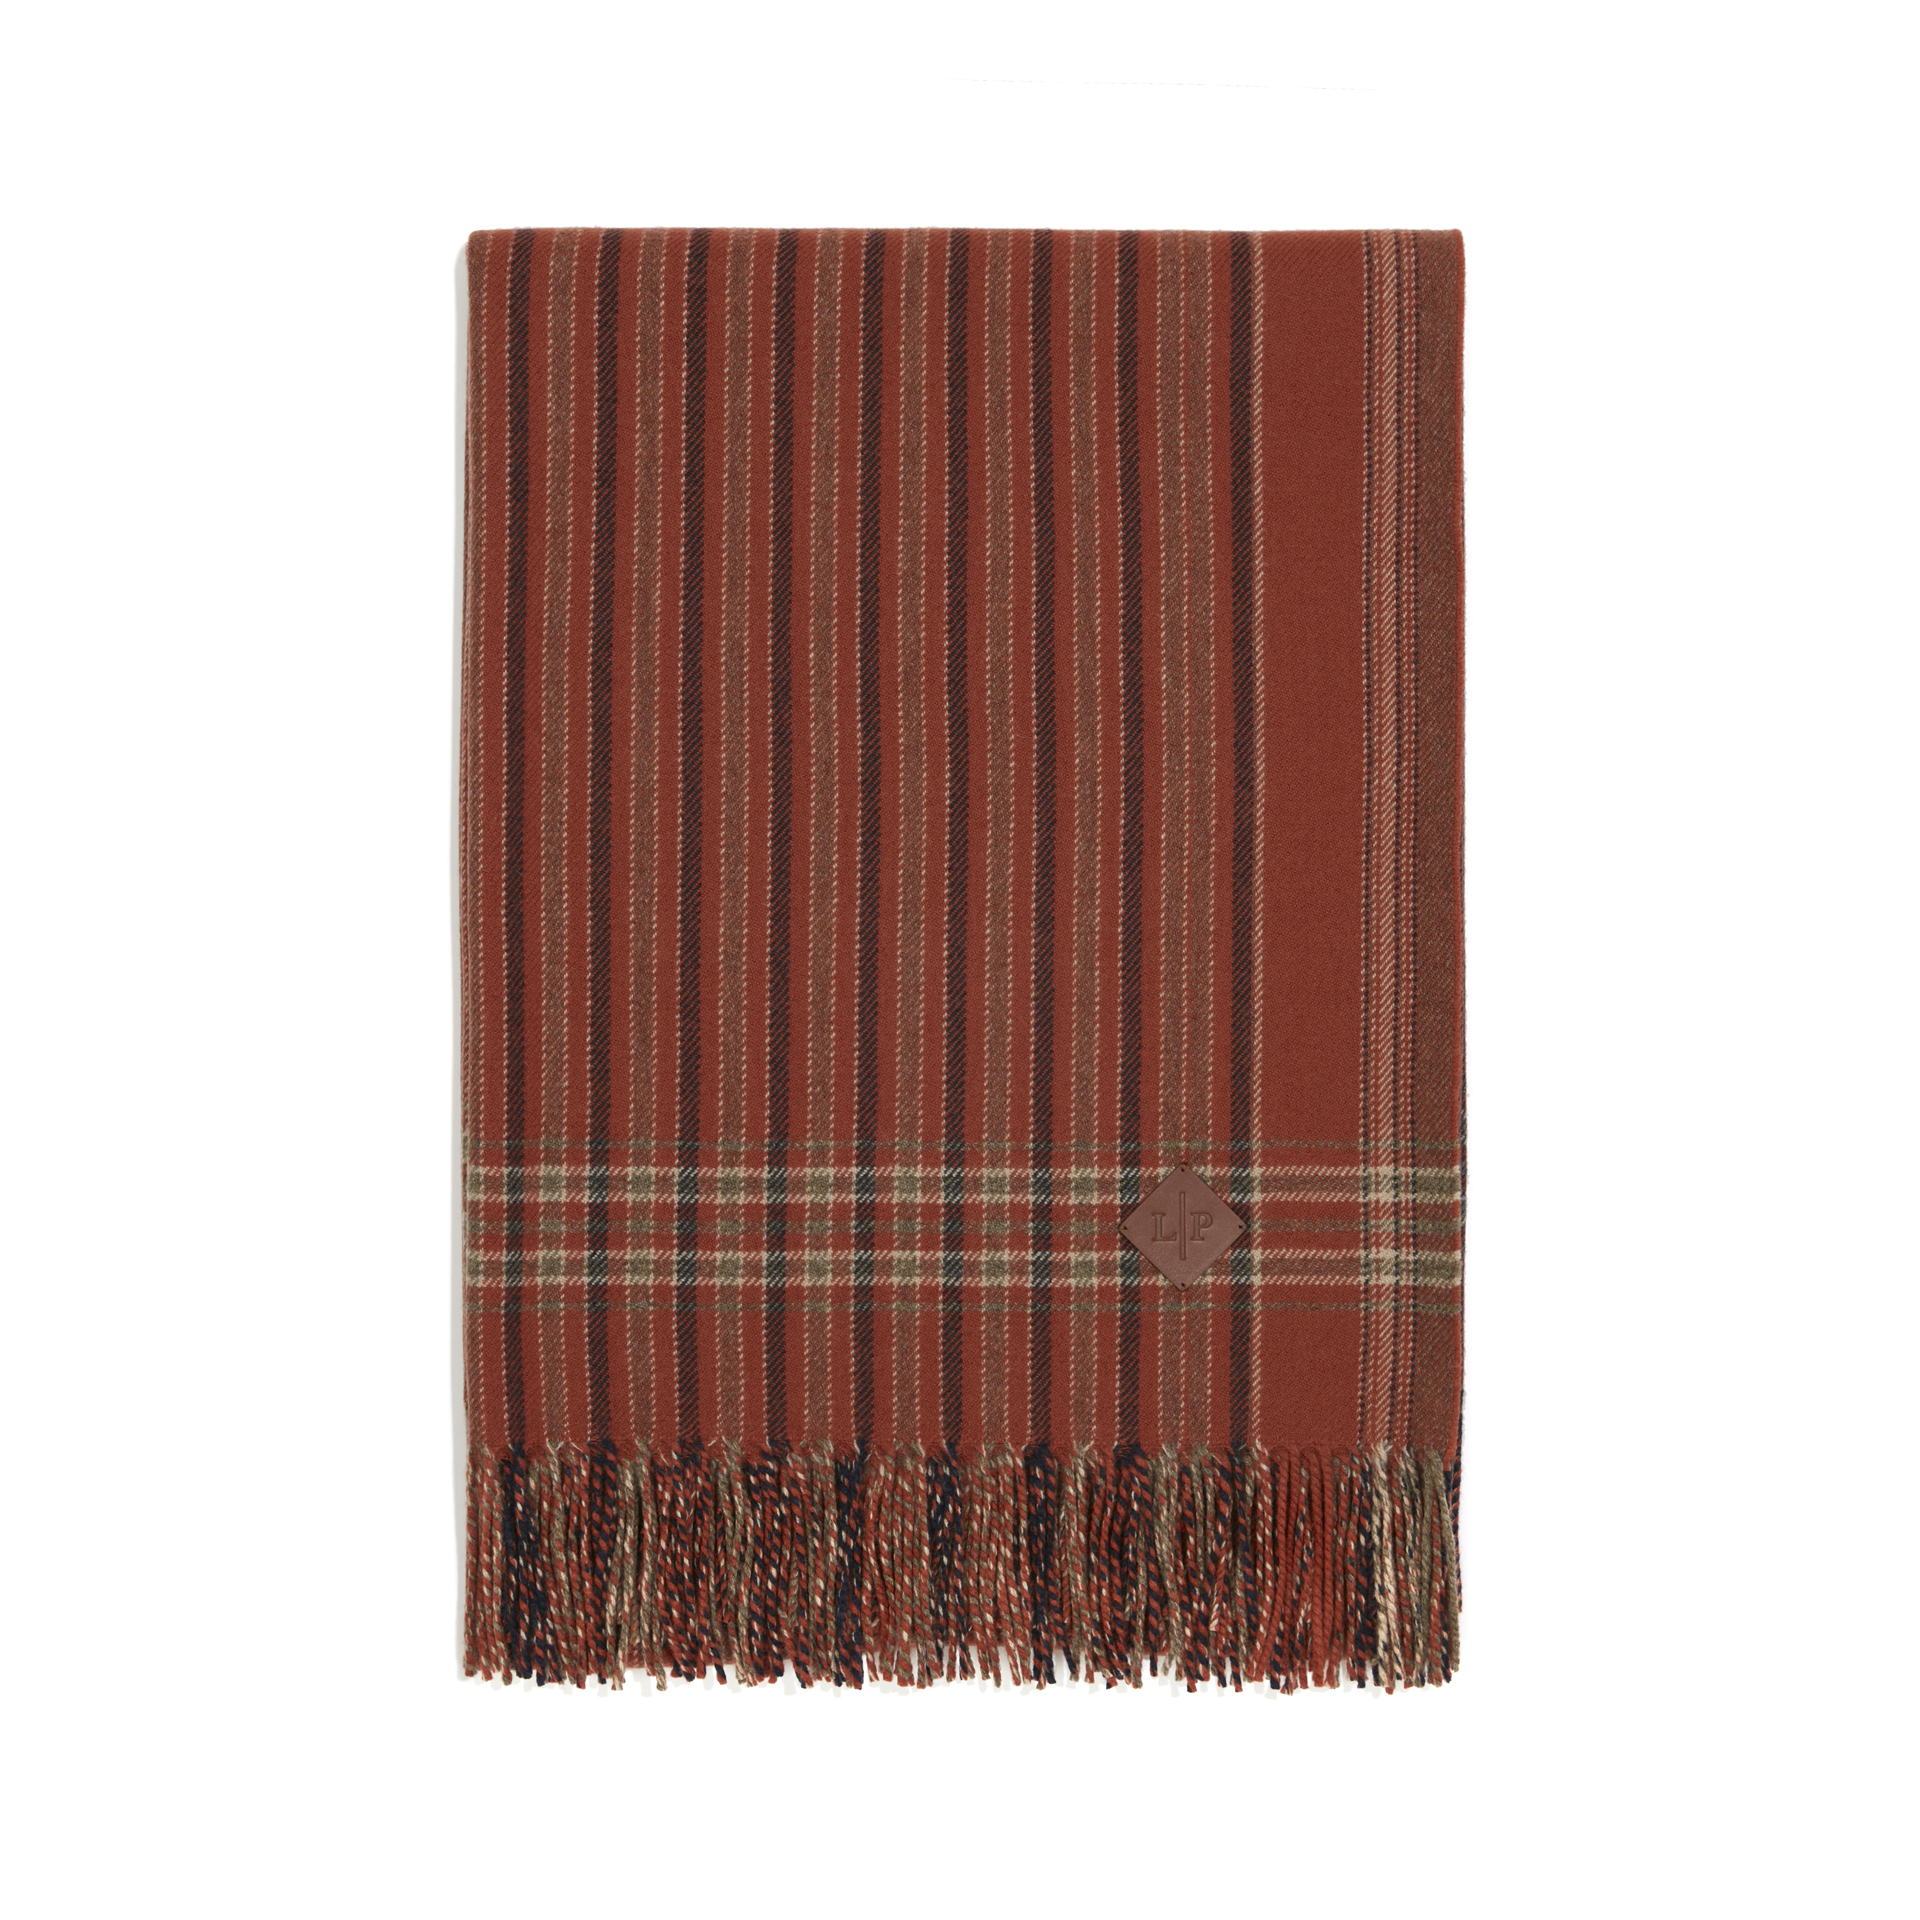 Loro Piana plaid turkana cashmere throw in cream with brown and white lines and checks with fringe